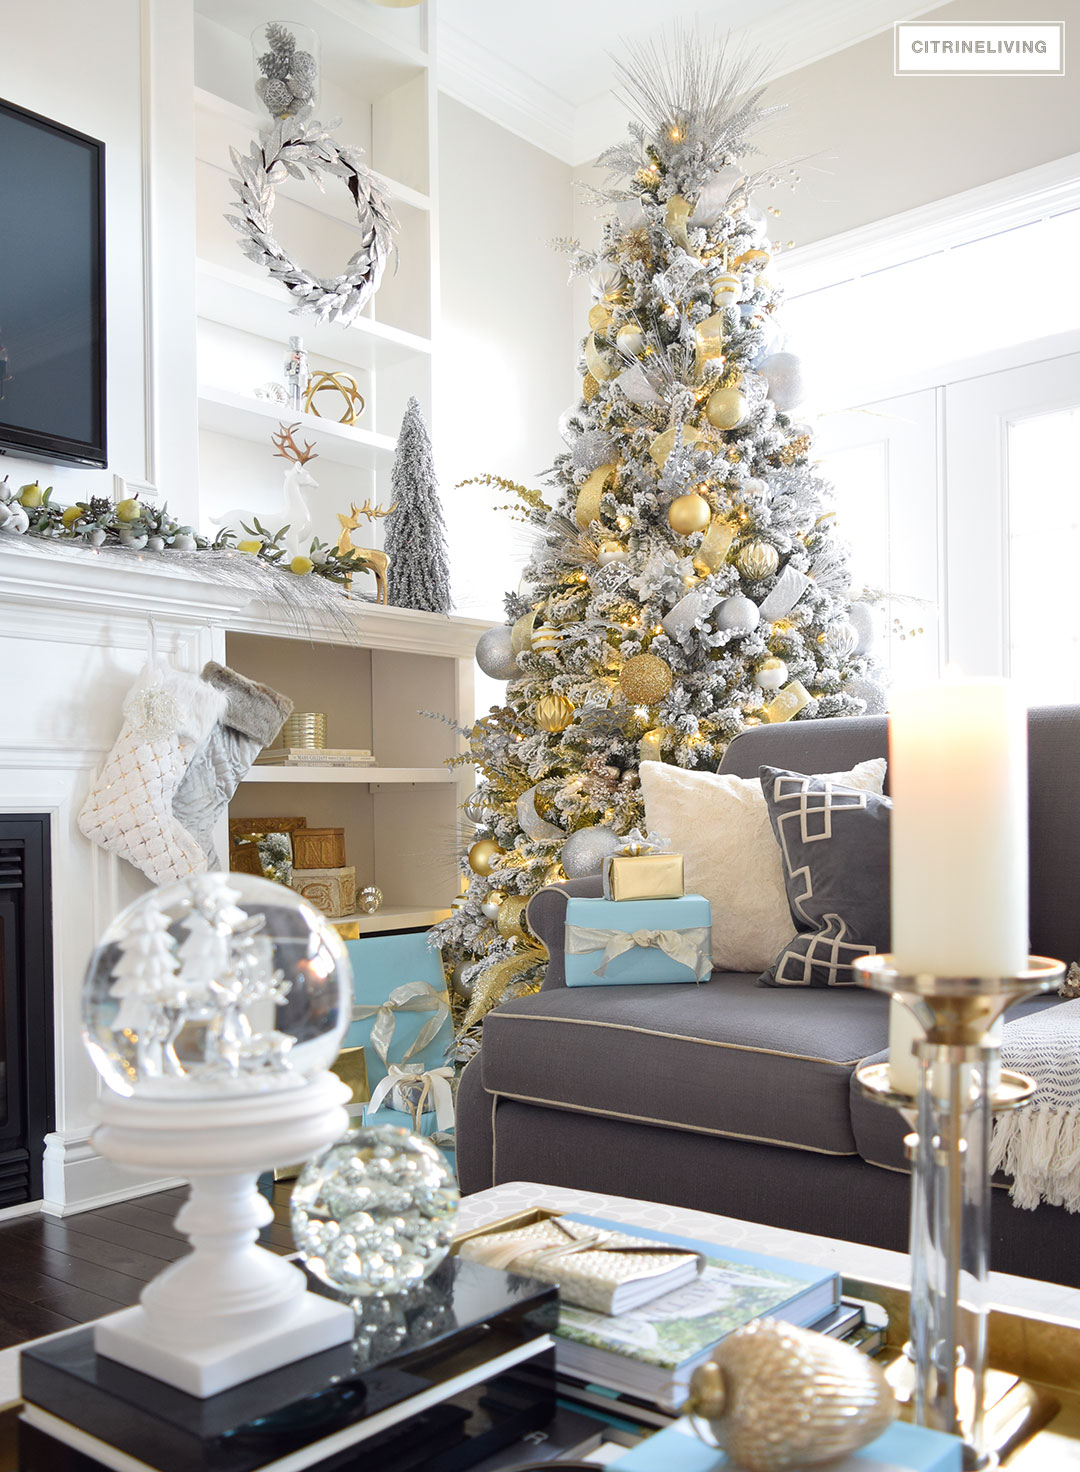 Grey couch, white fireplace and a flocked tree beside it.